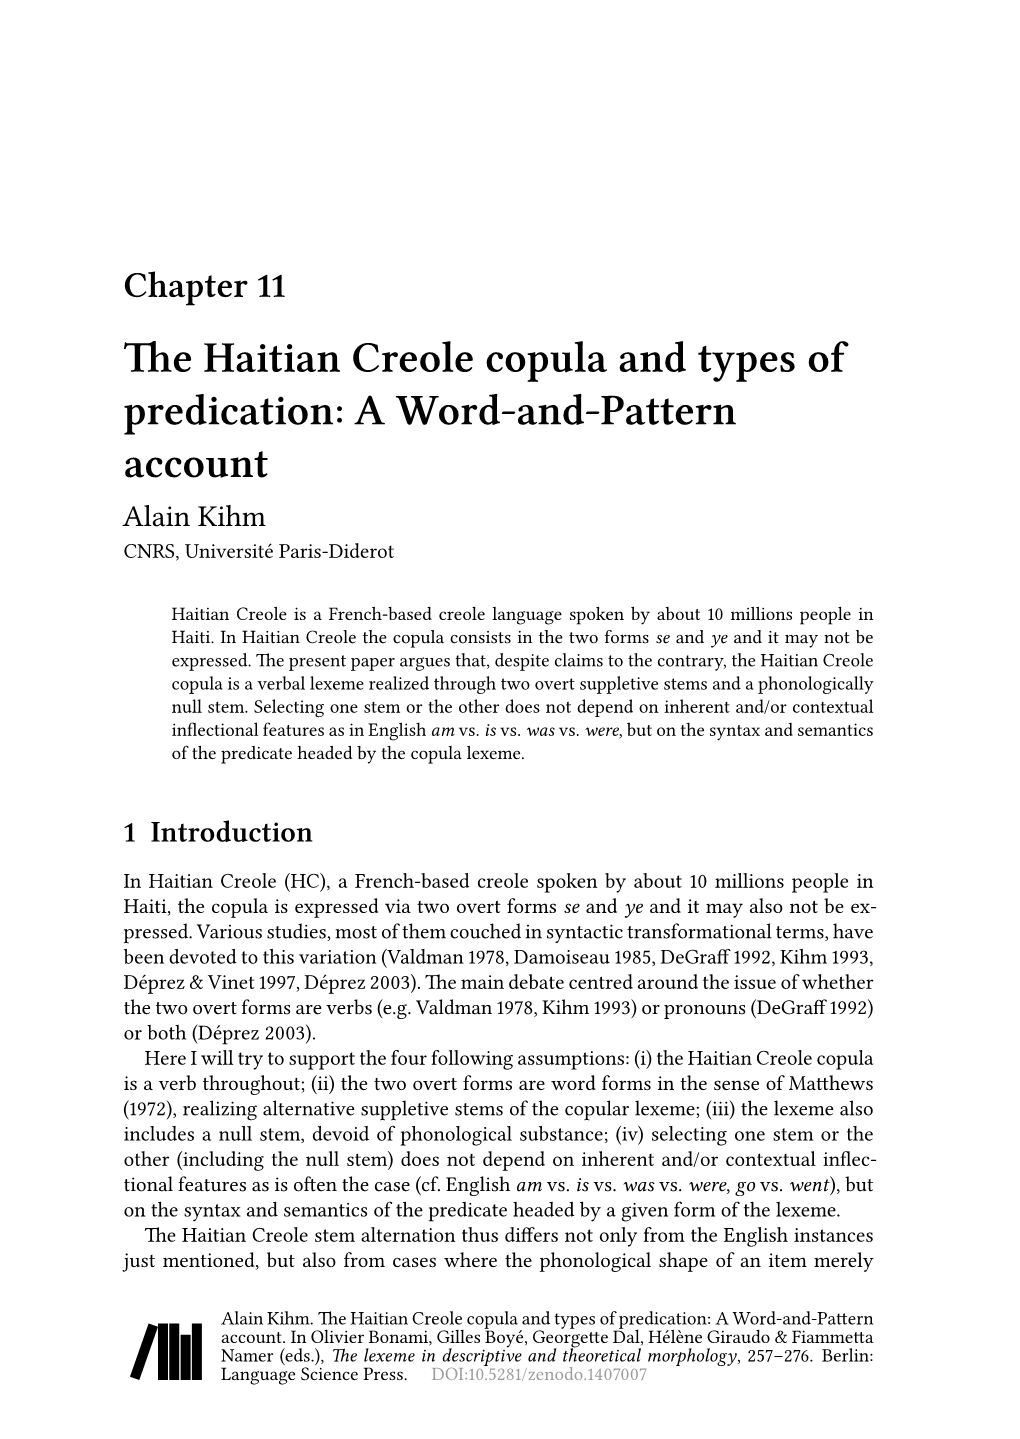 The Haitian Creole Copula and Types of Predication: a Word-And-Pattern Account Alain Kihm CNRS, Université Paris-Diderot